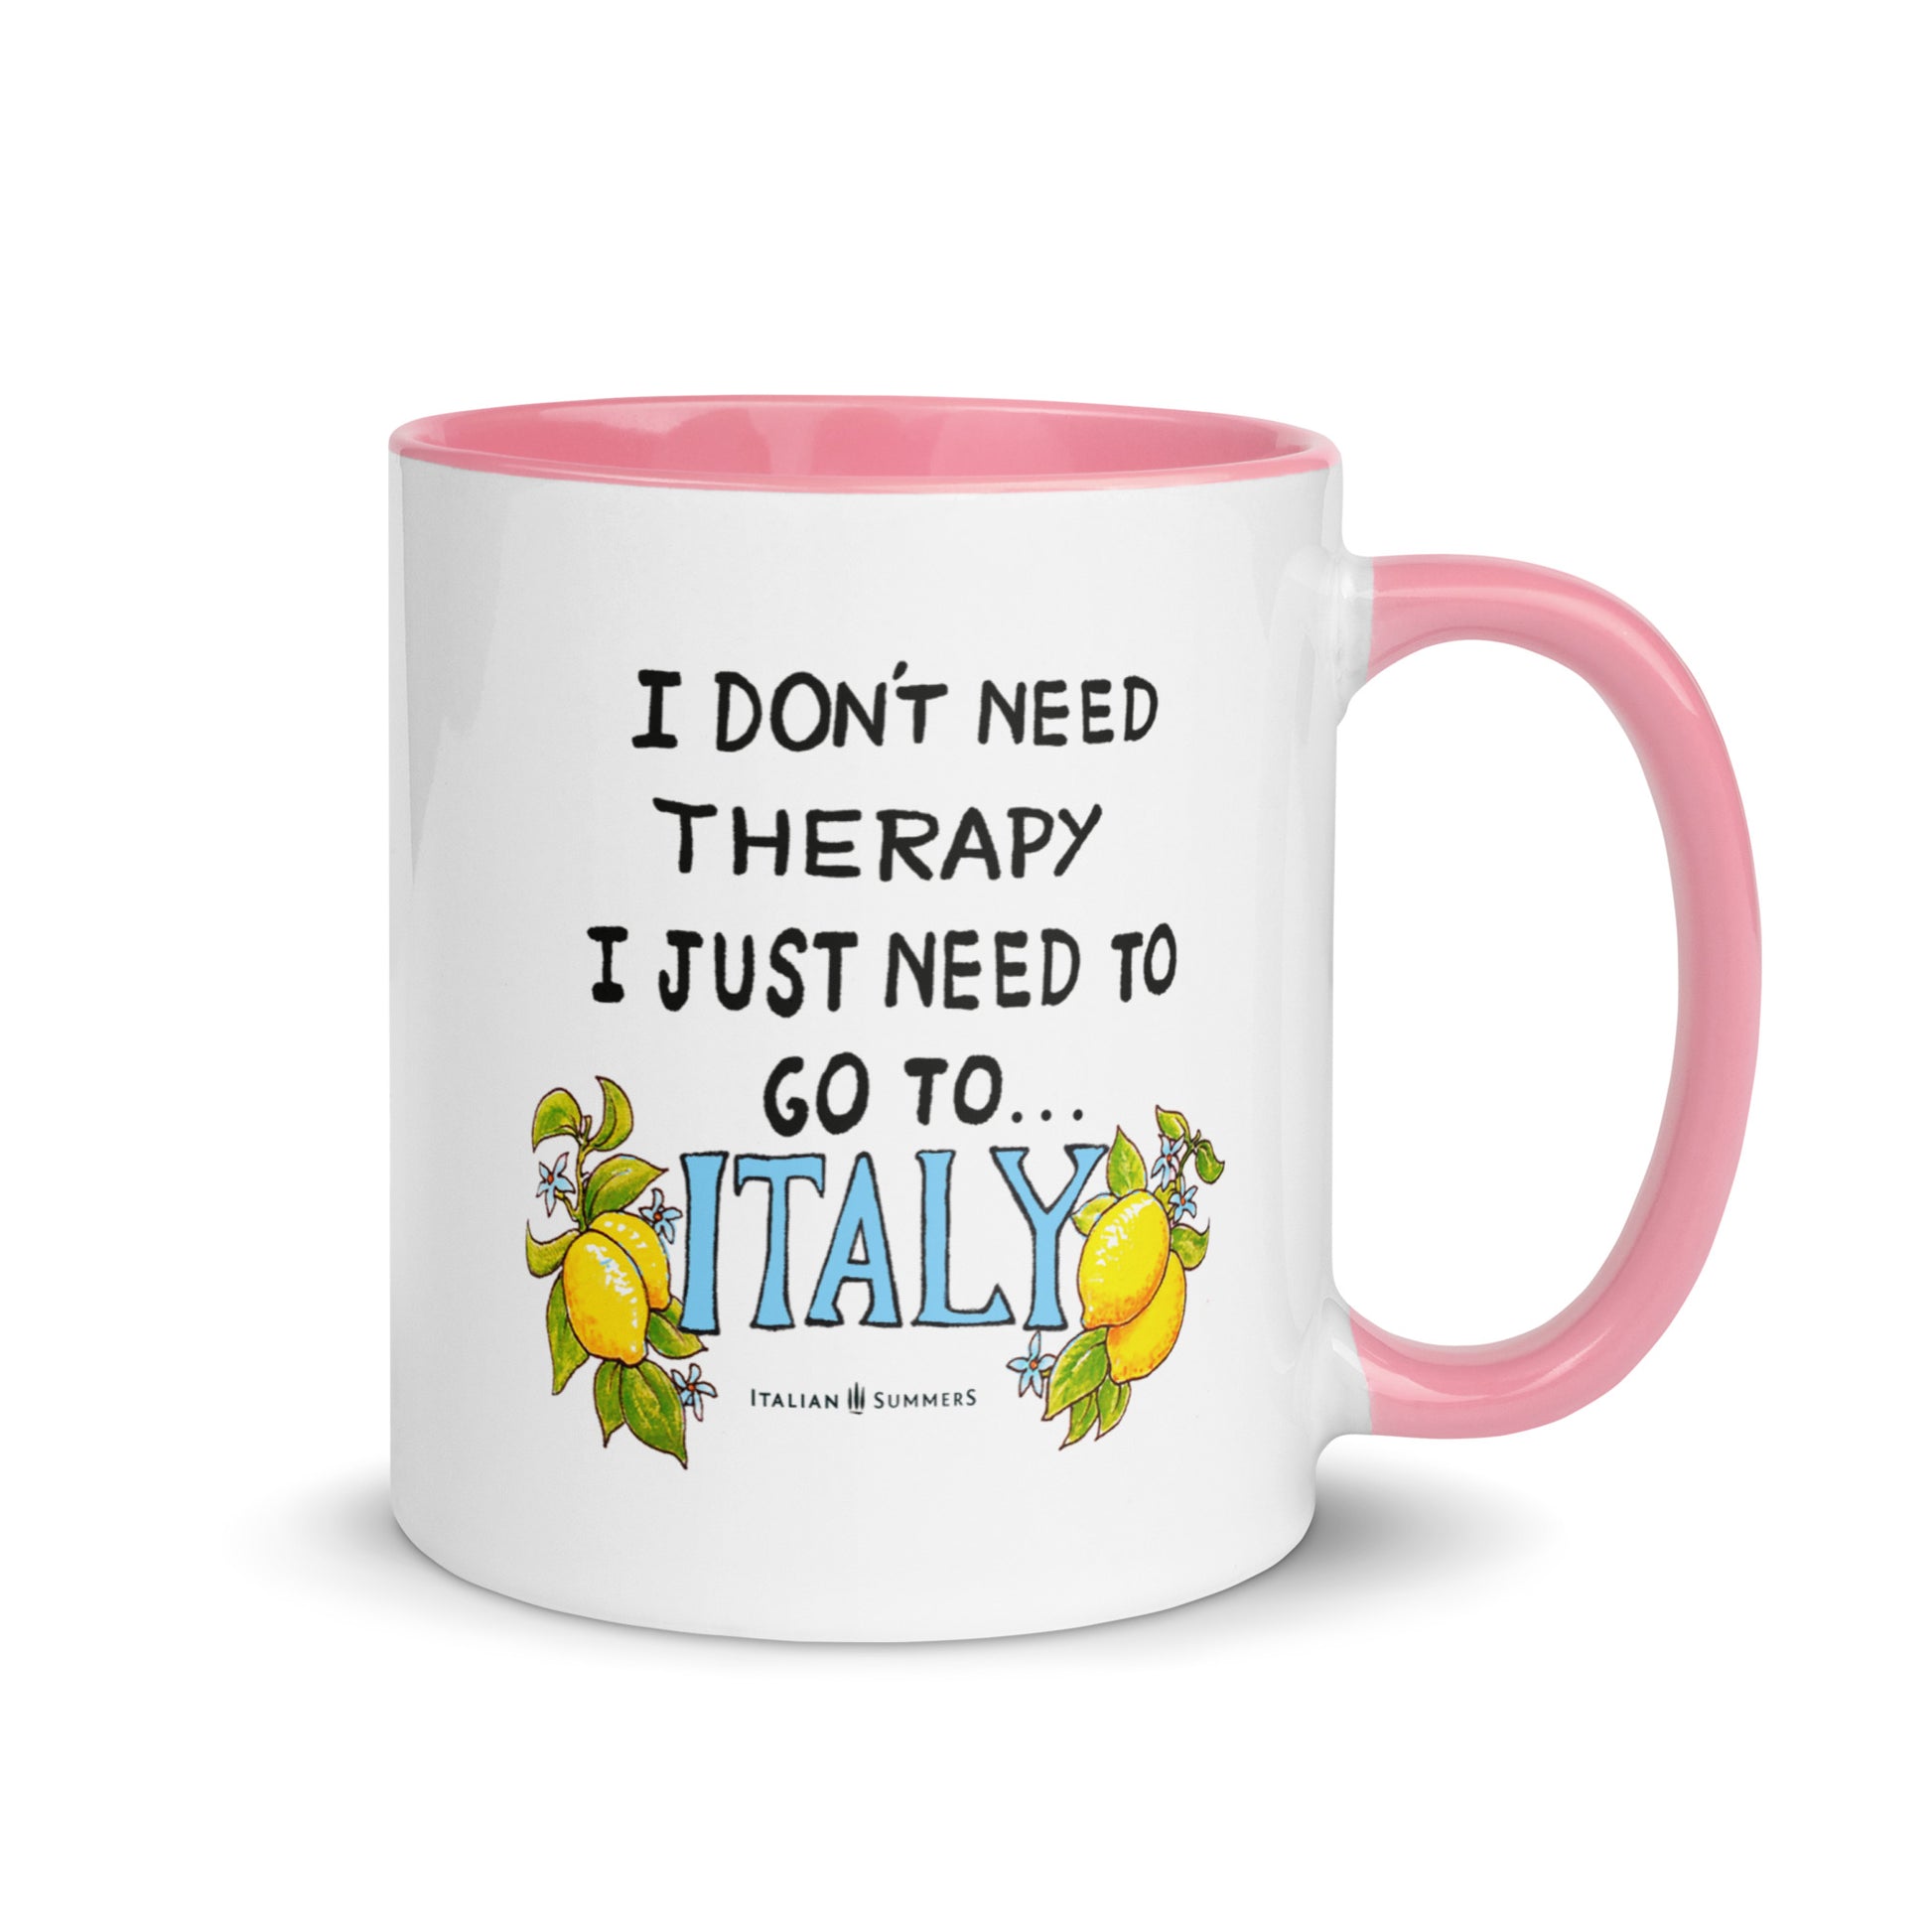 Italy inspired mug with the quote "I don't need therapy, I just need to go to Italy" The word Italy is written in a happy blue color and has 2 lemons on every side. The mug is printed on 2 sides and is available with colored inside/handle in blue yellow and pink